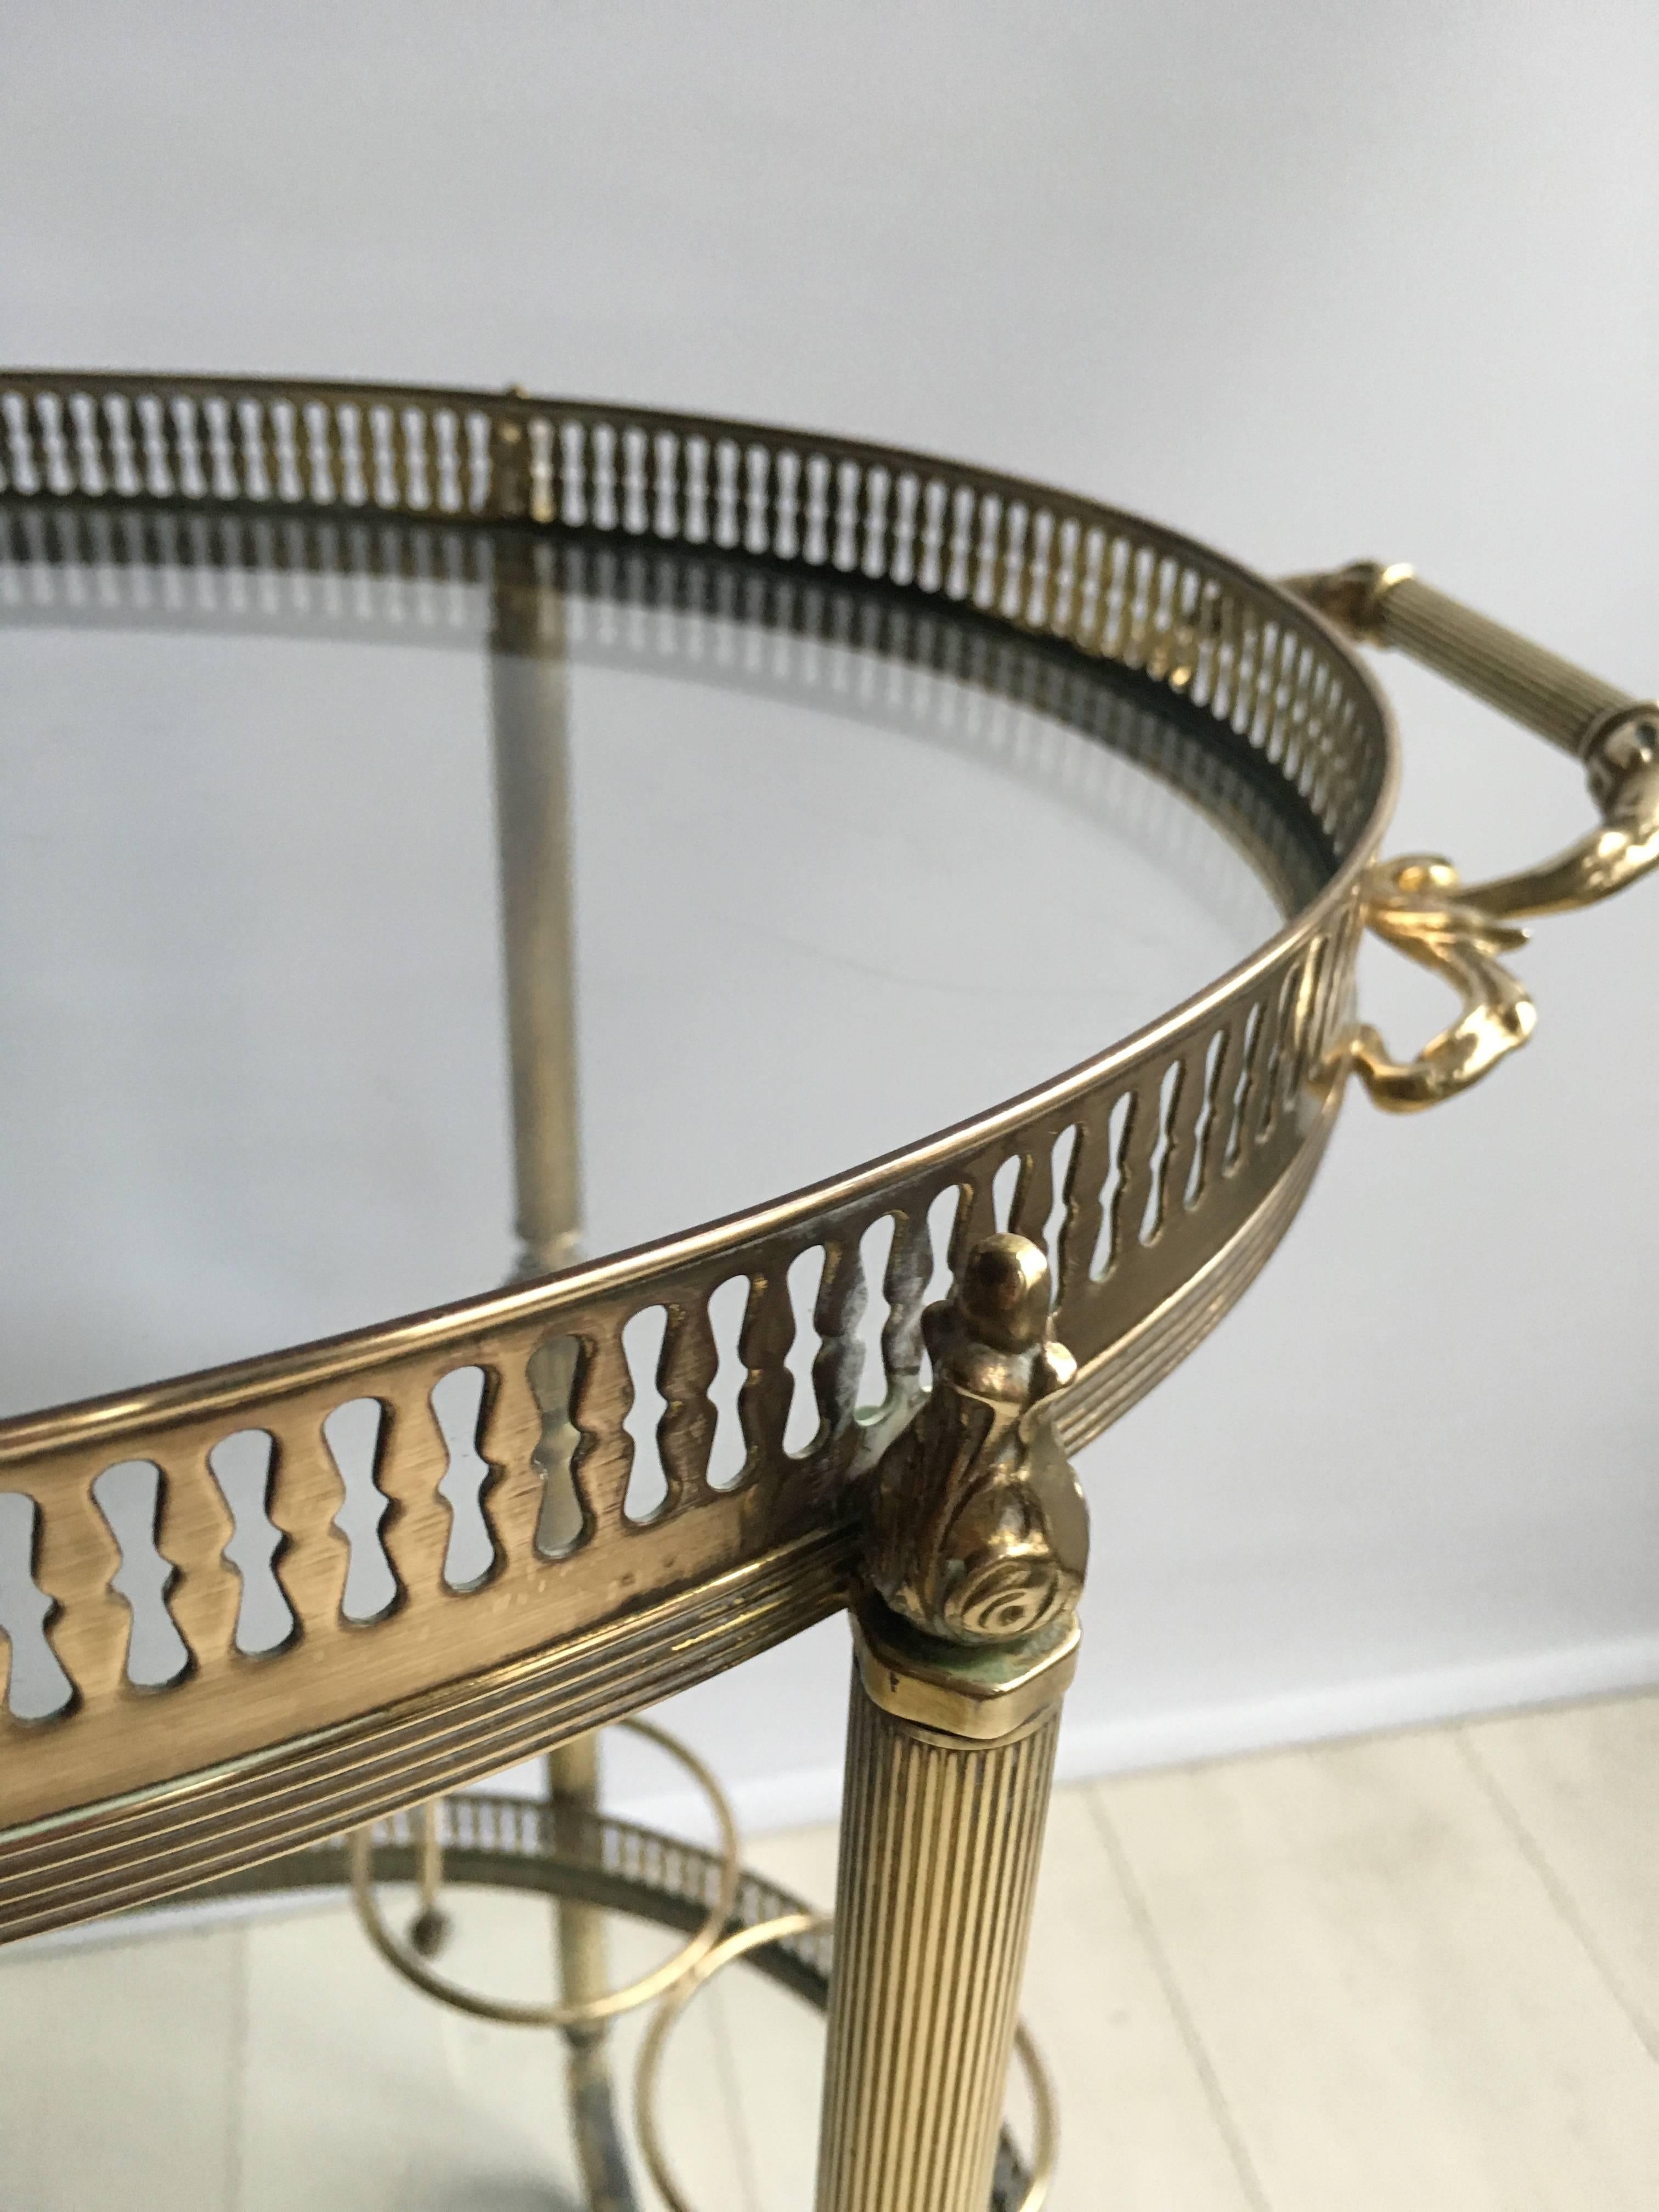 Beautiful oval drinks trolley with polished brass frame from France, circa 1950

Decorative finials and handle with bottle holder to lower tier

Top tray measures 53cm wide, 63cm with handles and 36cm deep. 
Stands 64cm to top glass, 66.5cm in